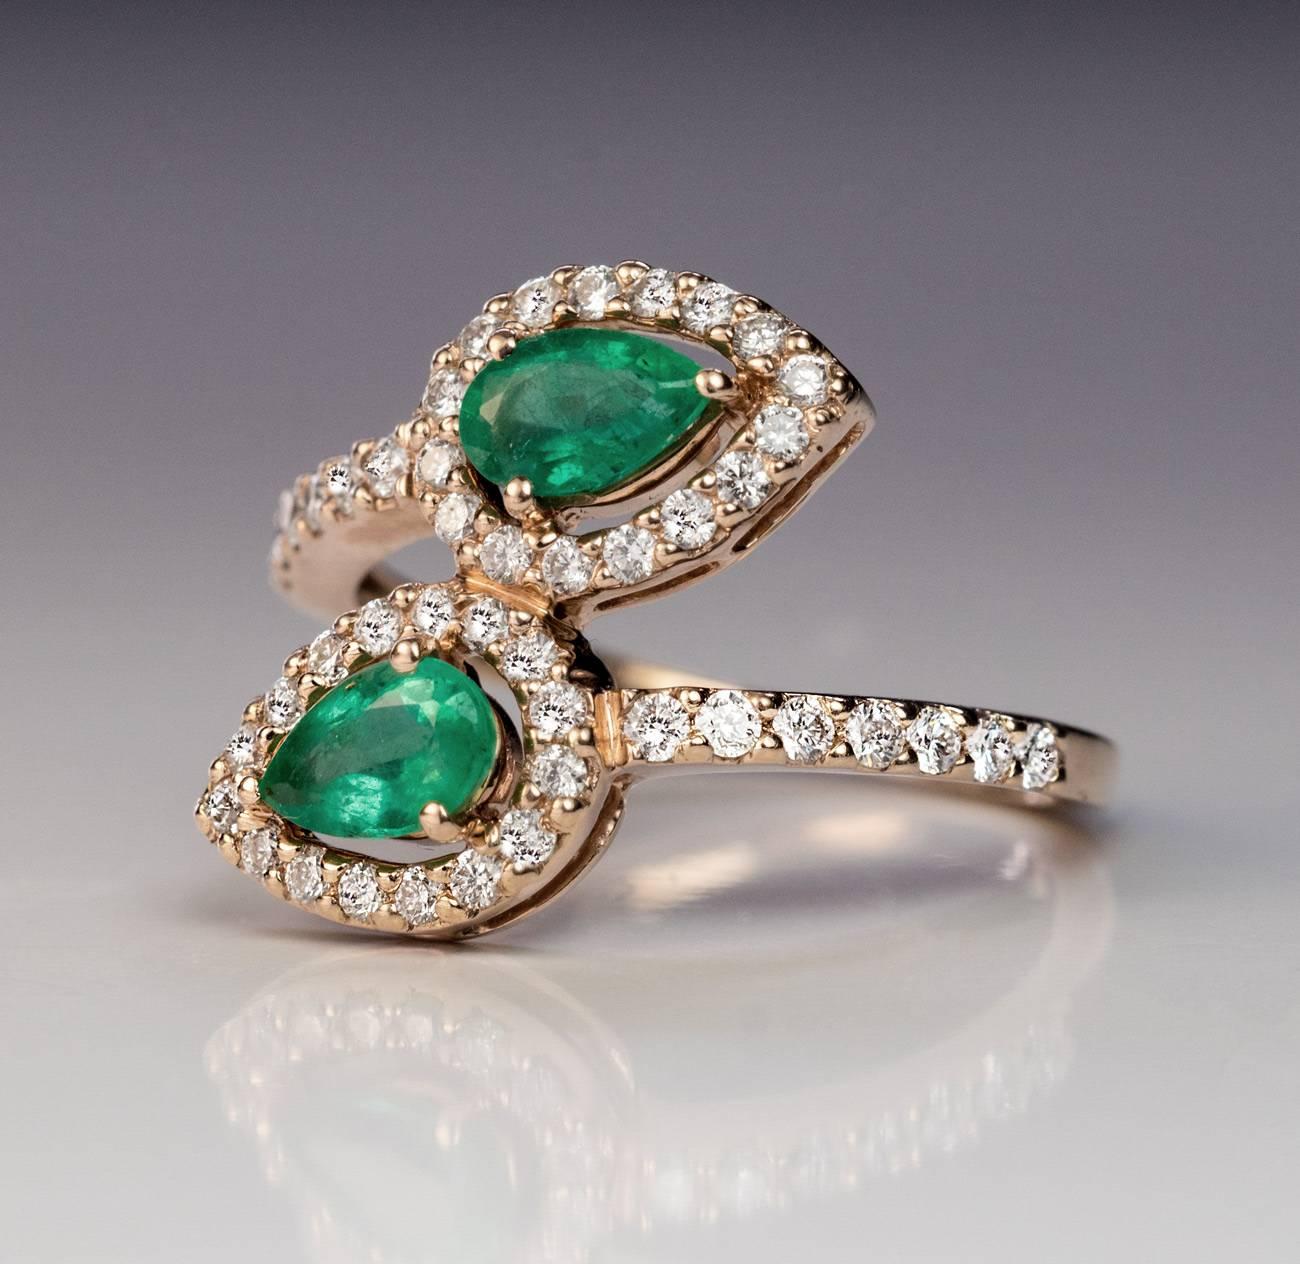 A modern 14K gold bypass ring is set with two pear cut natural emeralds and 46 sparkling bright white brilliant cut diamonds.
Estimated emerald weight 0.39 ct and 0.41 ct

Approximate total diamond weight 0.53 ct
The ring is marked with Russian 585